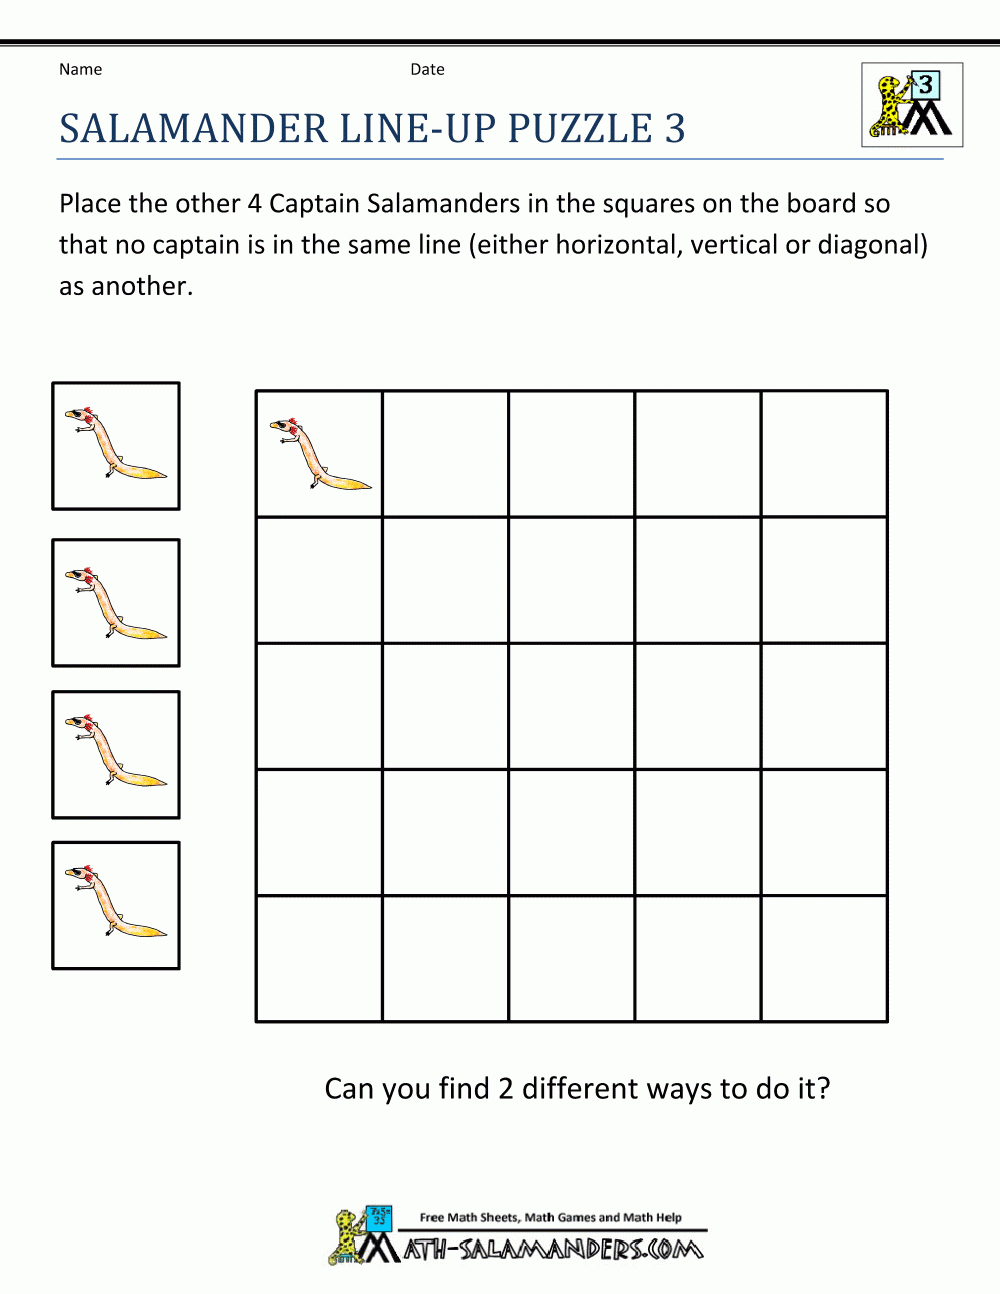 Math Puzzle Worksheets Salamander Line Up Puzzle 3. To Challenge My - Printable Maths Puzzles Ks3